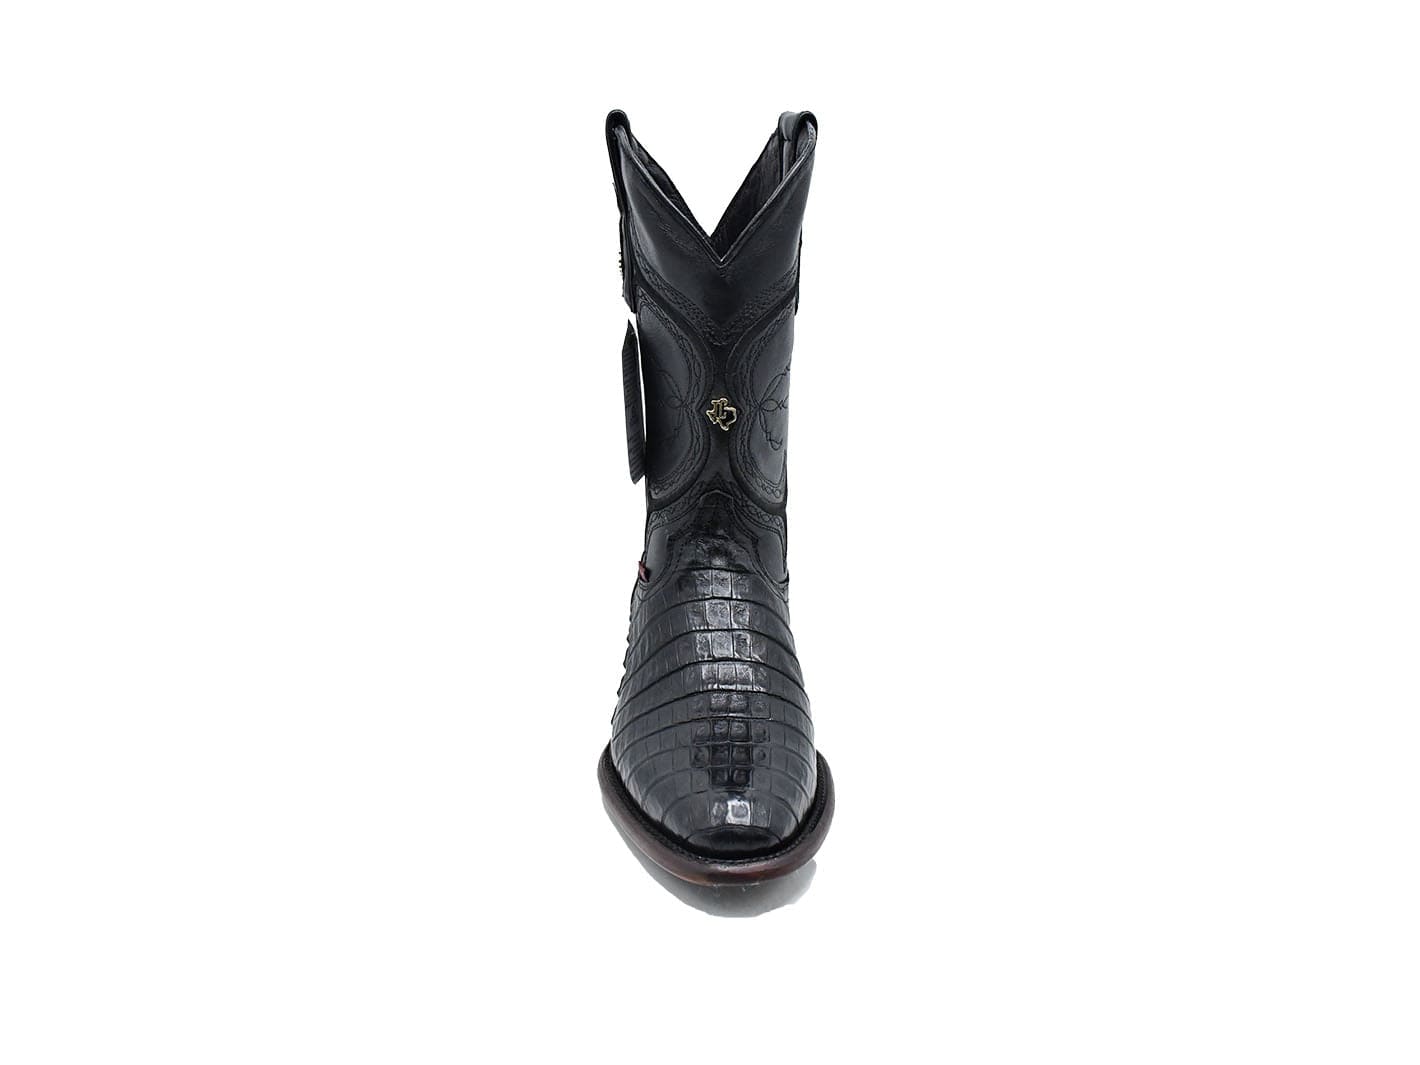 Texas Country Exotic Boot Caiman Belly Black LM81